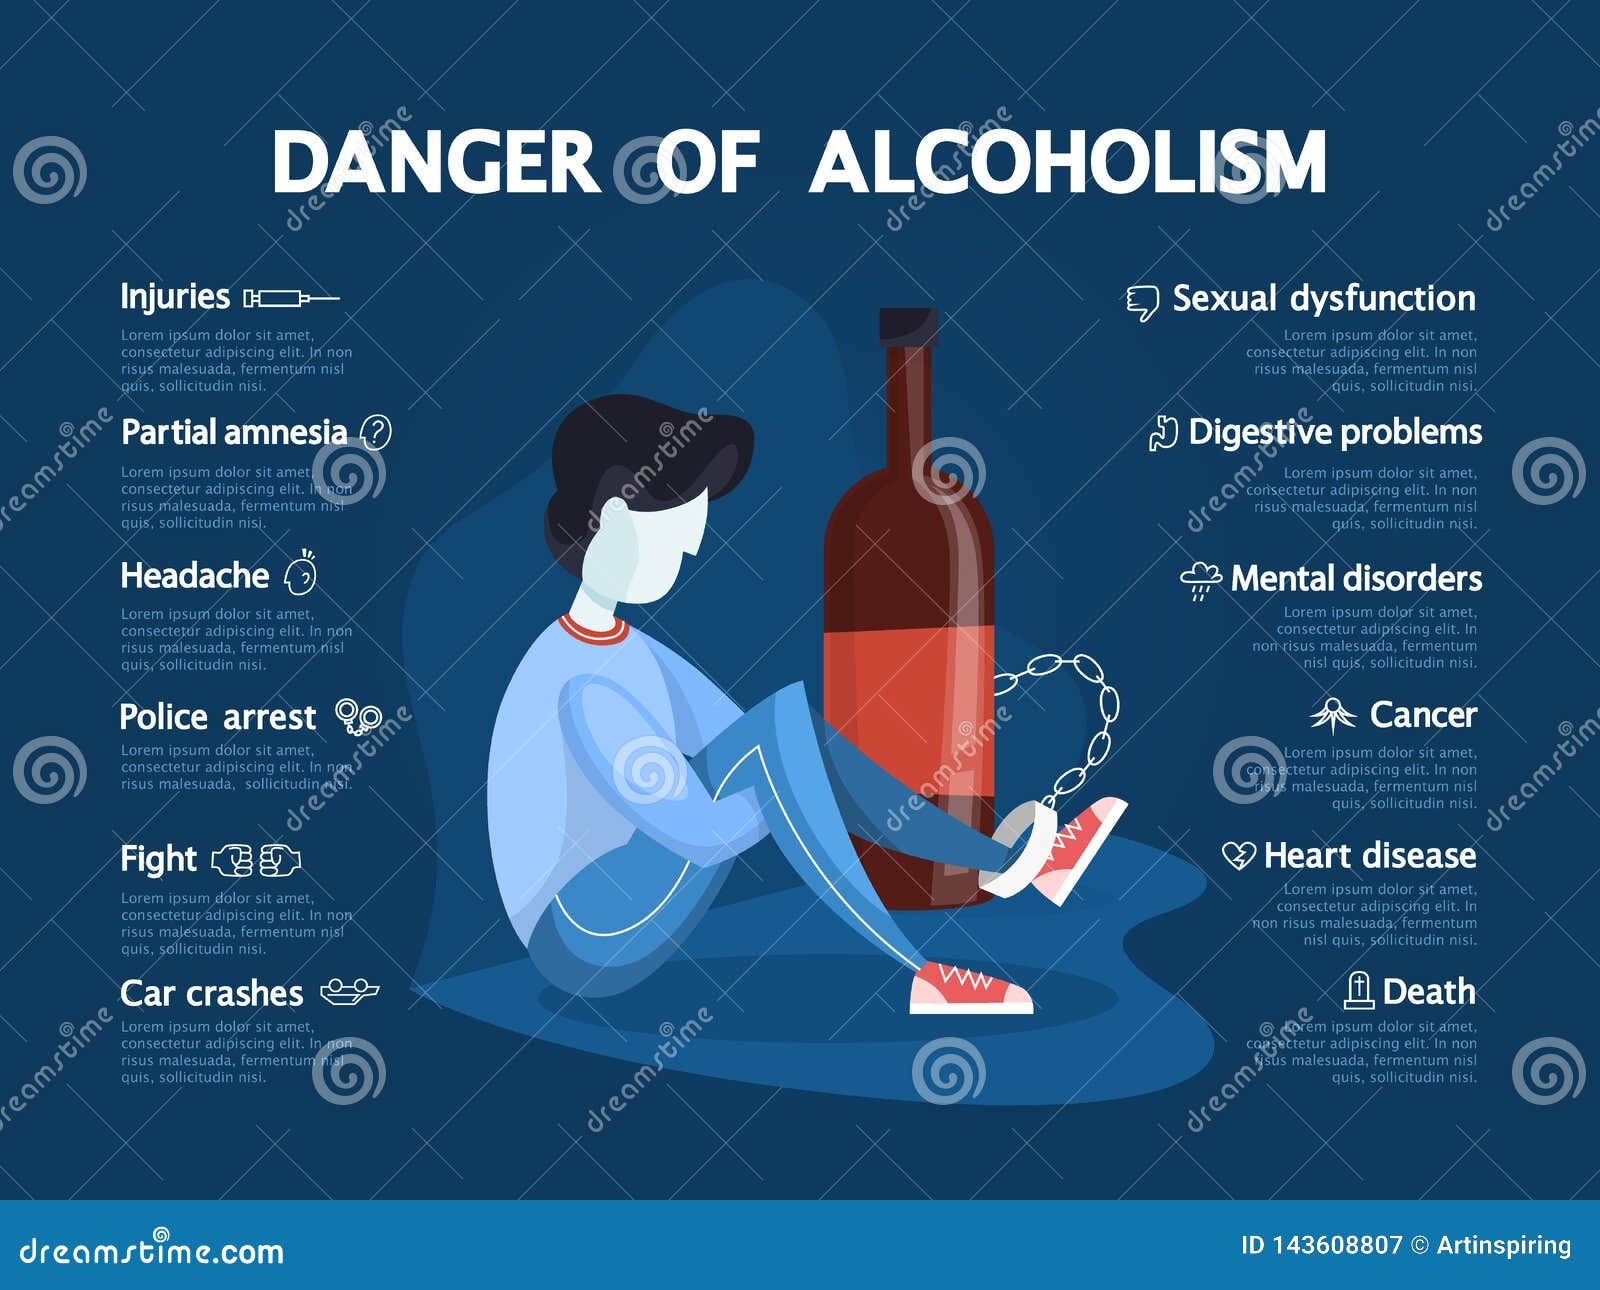 Danger Of Alcoholism Infographic Drunk Alcoholic Chained Stock Vector Illustration Of 